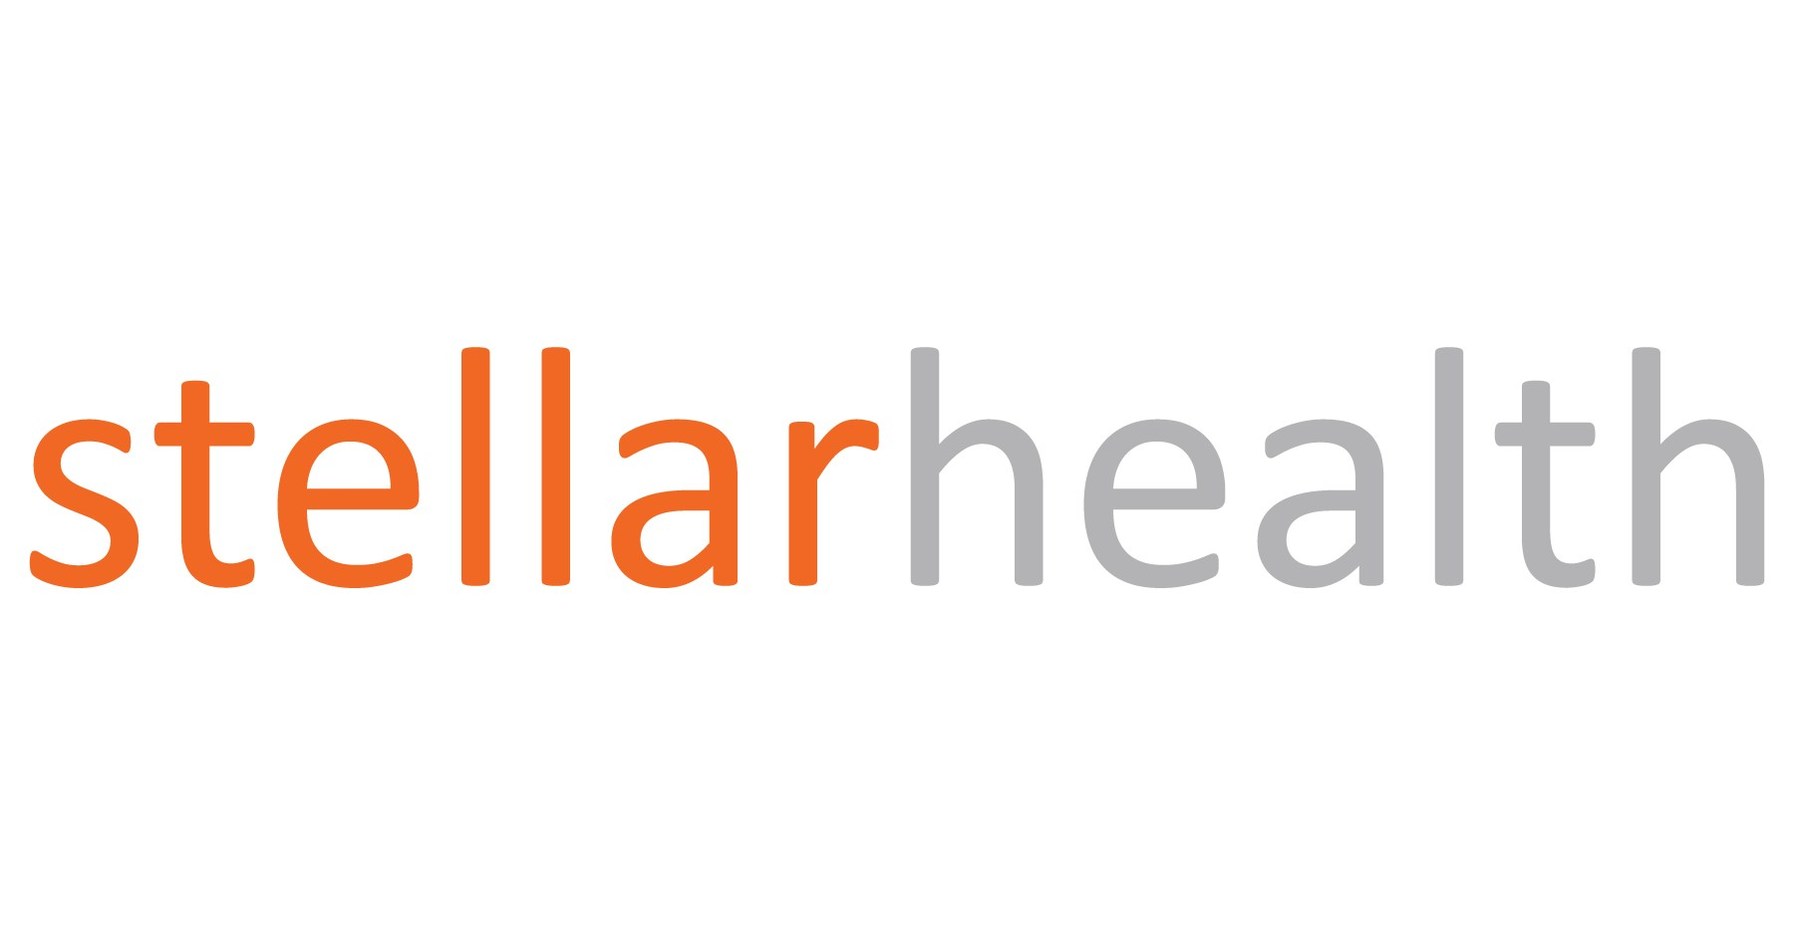 Stellar Health Announces Expansion of Value-Based Care Initiative for Highmark, Inc.